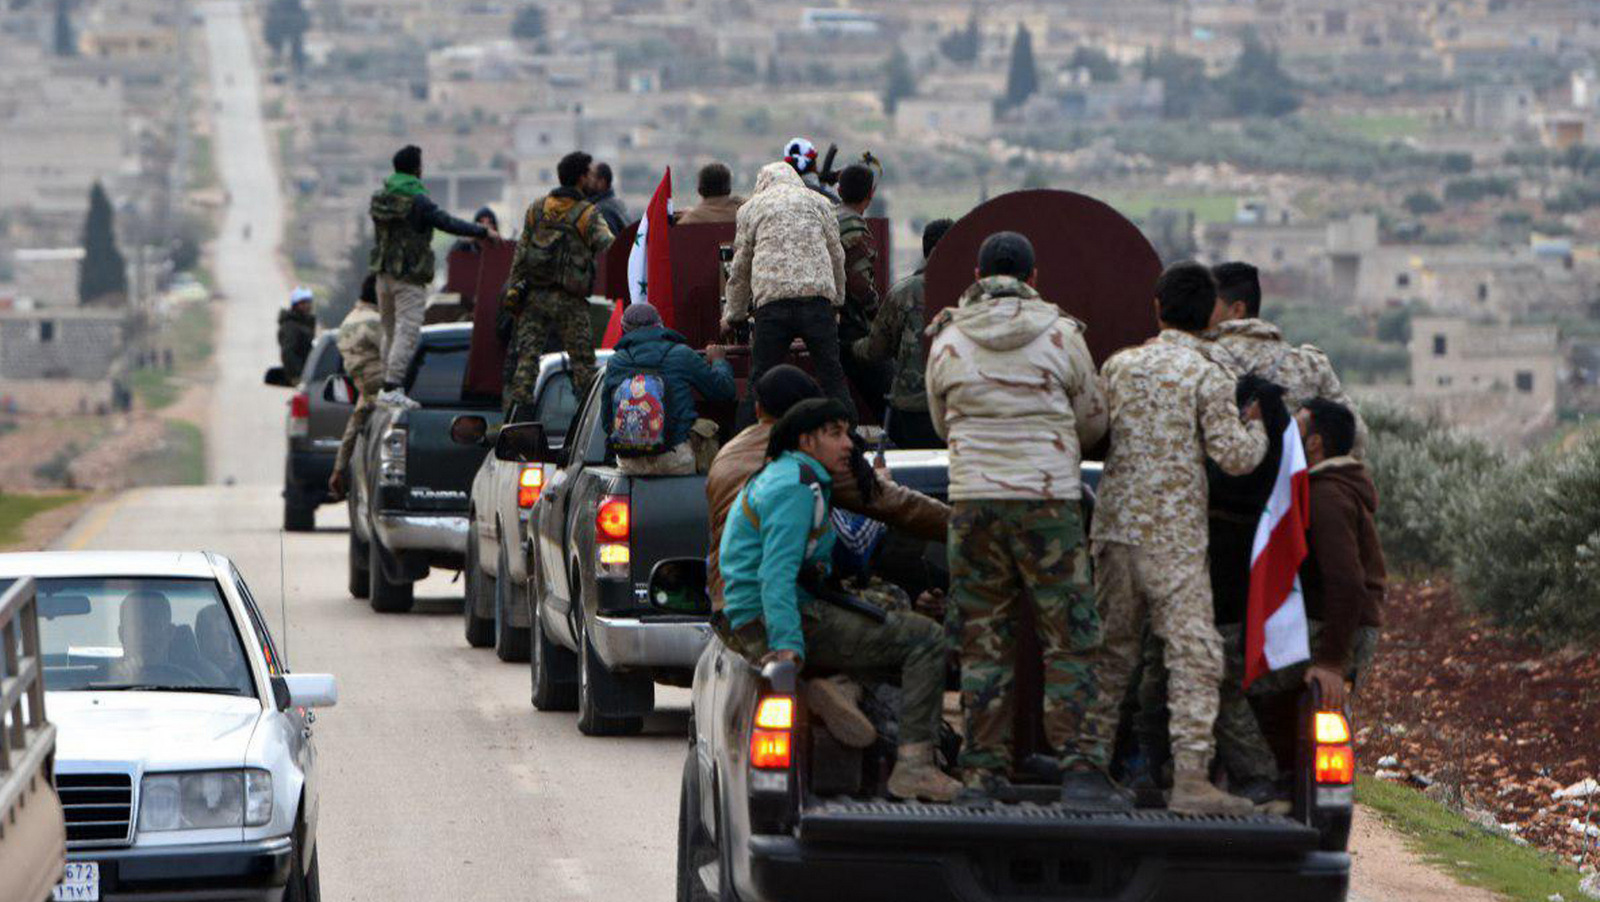 A convoy of militiamen loyal to the Syrian government on their way to aid the Kurds against Turkish forces, in the northern city of Afrin, Syria. (SANA via AP)